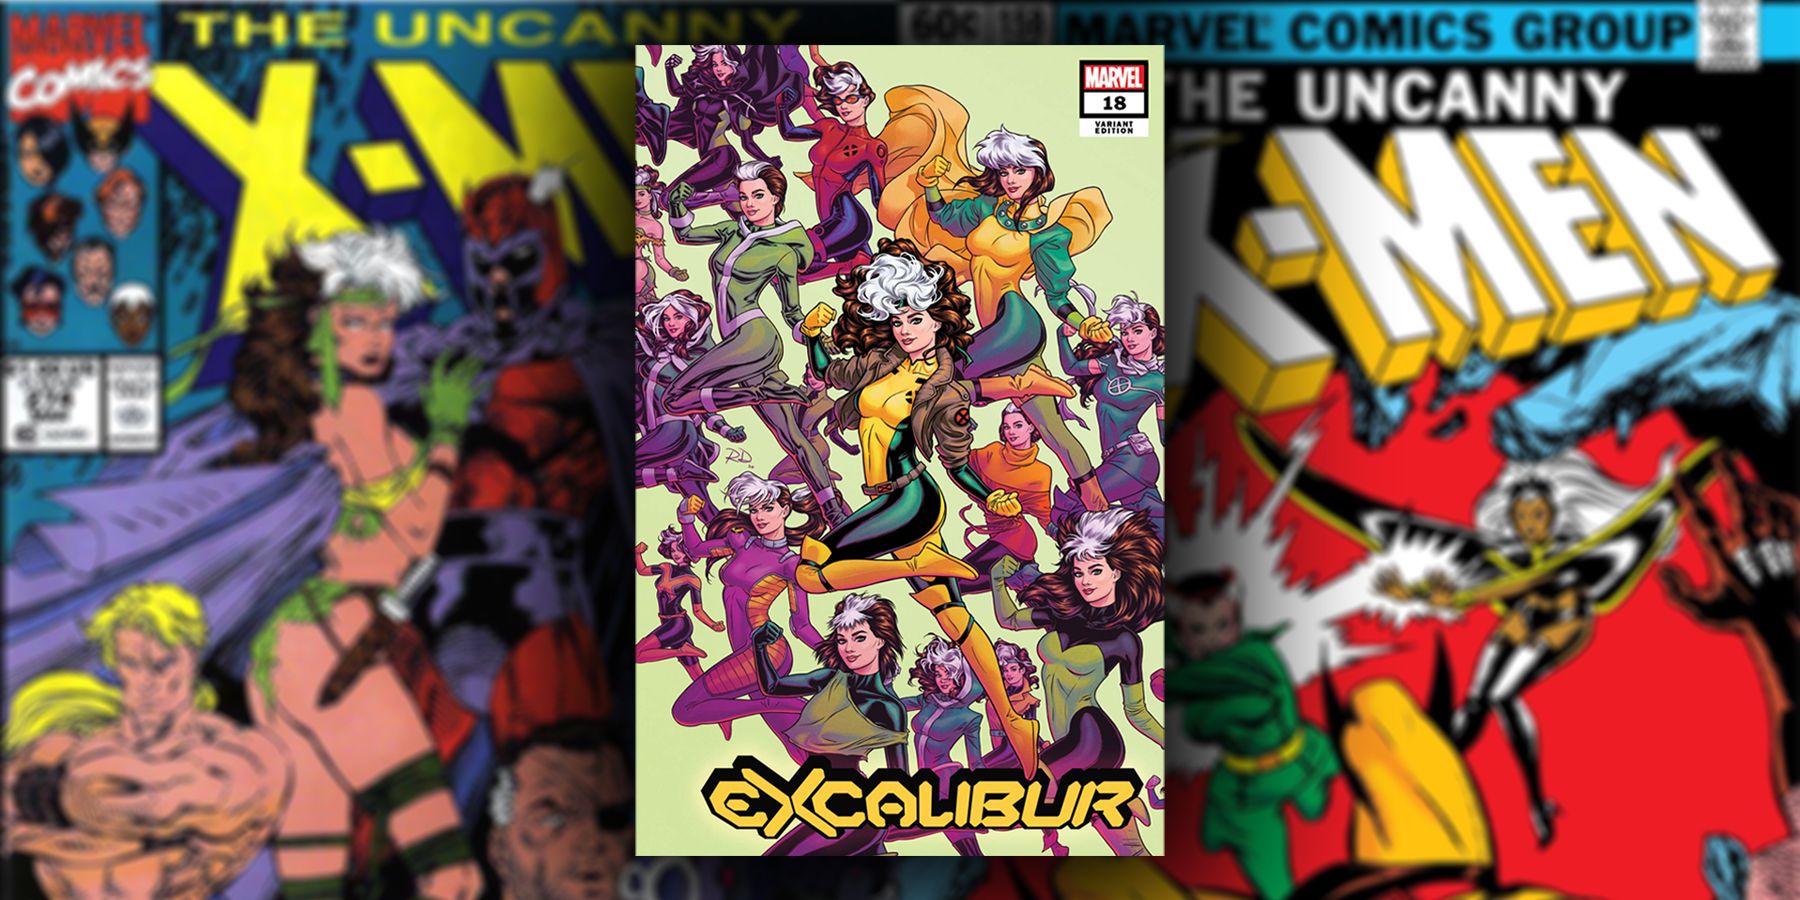 Several comics covers with Rogue from the X-Men. The centered cover features her outfits from her publication history.